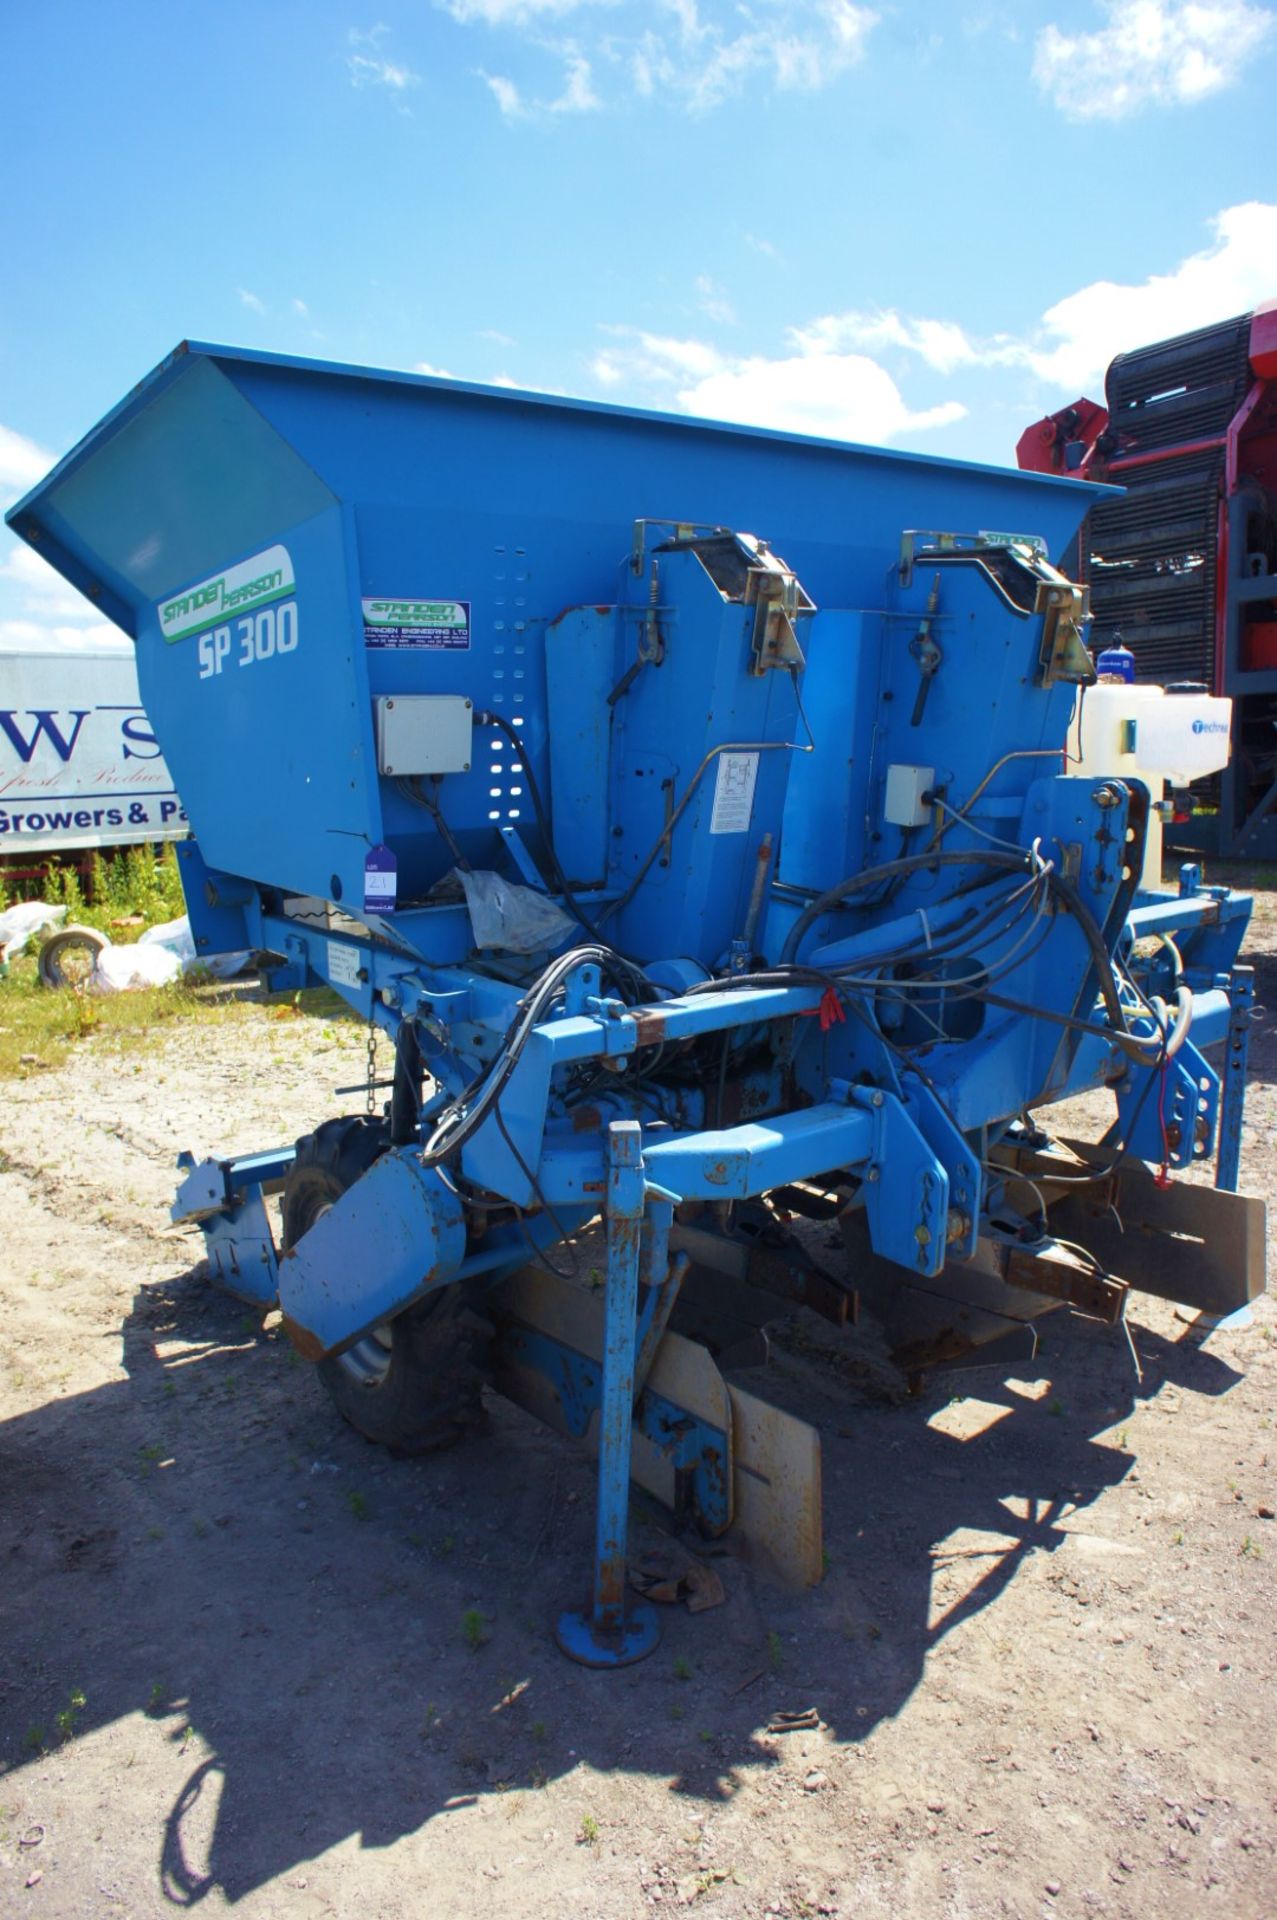 Standen Pearson BB3 (SP300), 3 Row Potato Planter, Serial Number 678, Year 2012 - Image 6 of 8